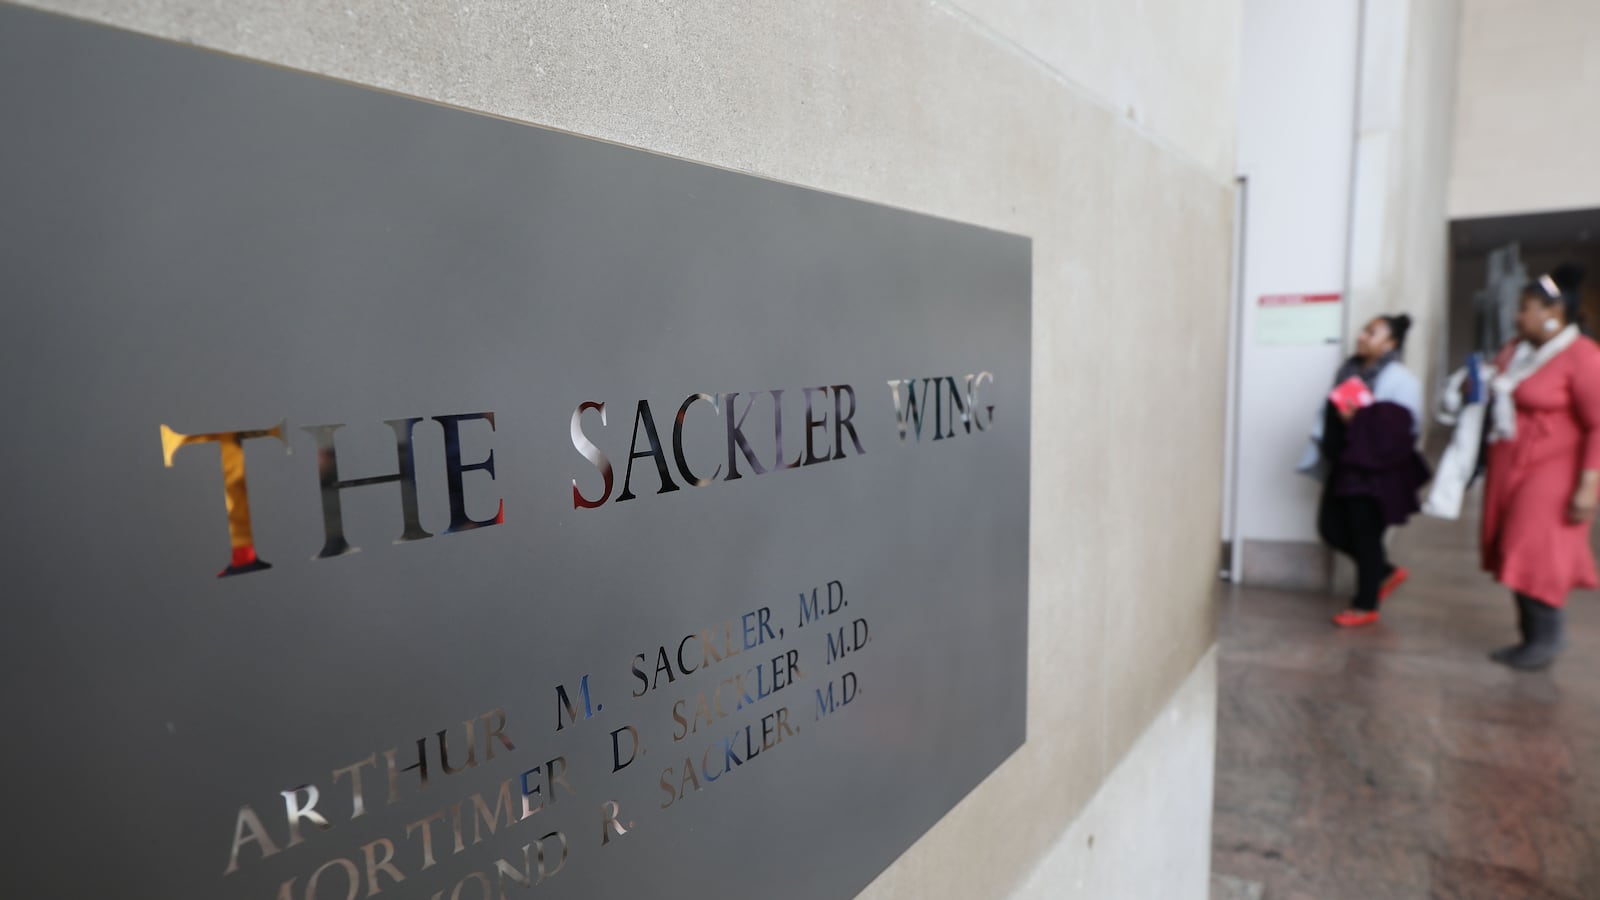 NEW YORK, NEW YORK - A sign welcomes visitors to the Sackler Wing at the Metropolitan Museum of Art in New York City. (Photo by Spencer Platt/Getty Images)